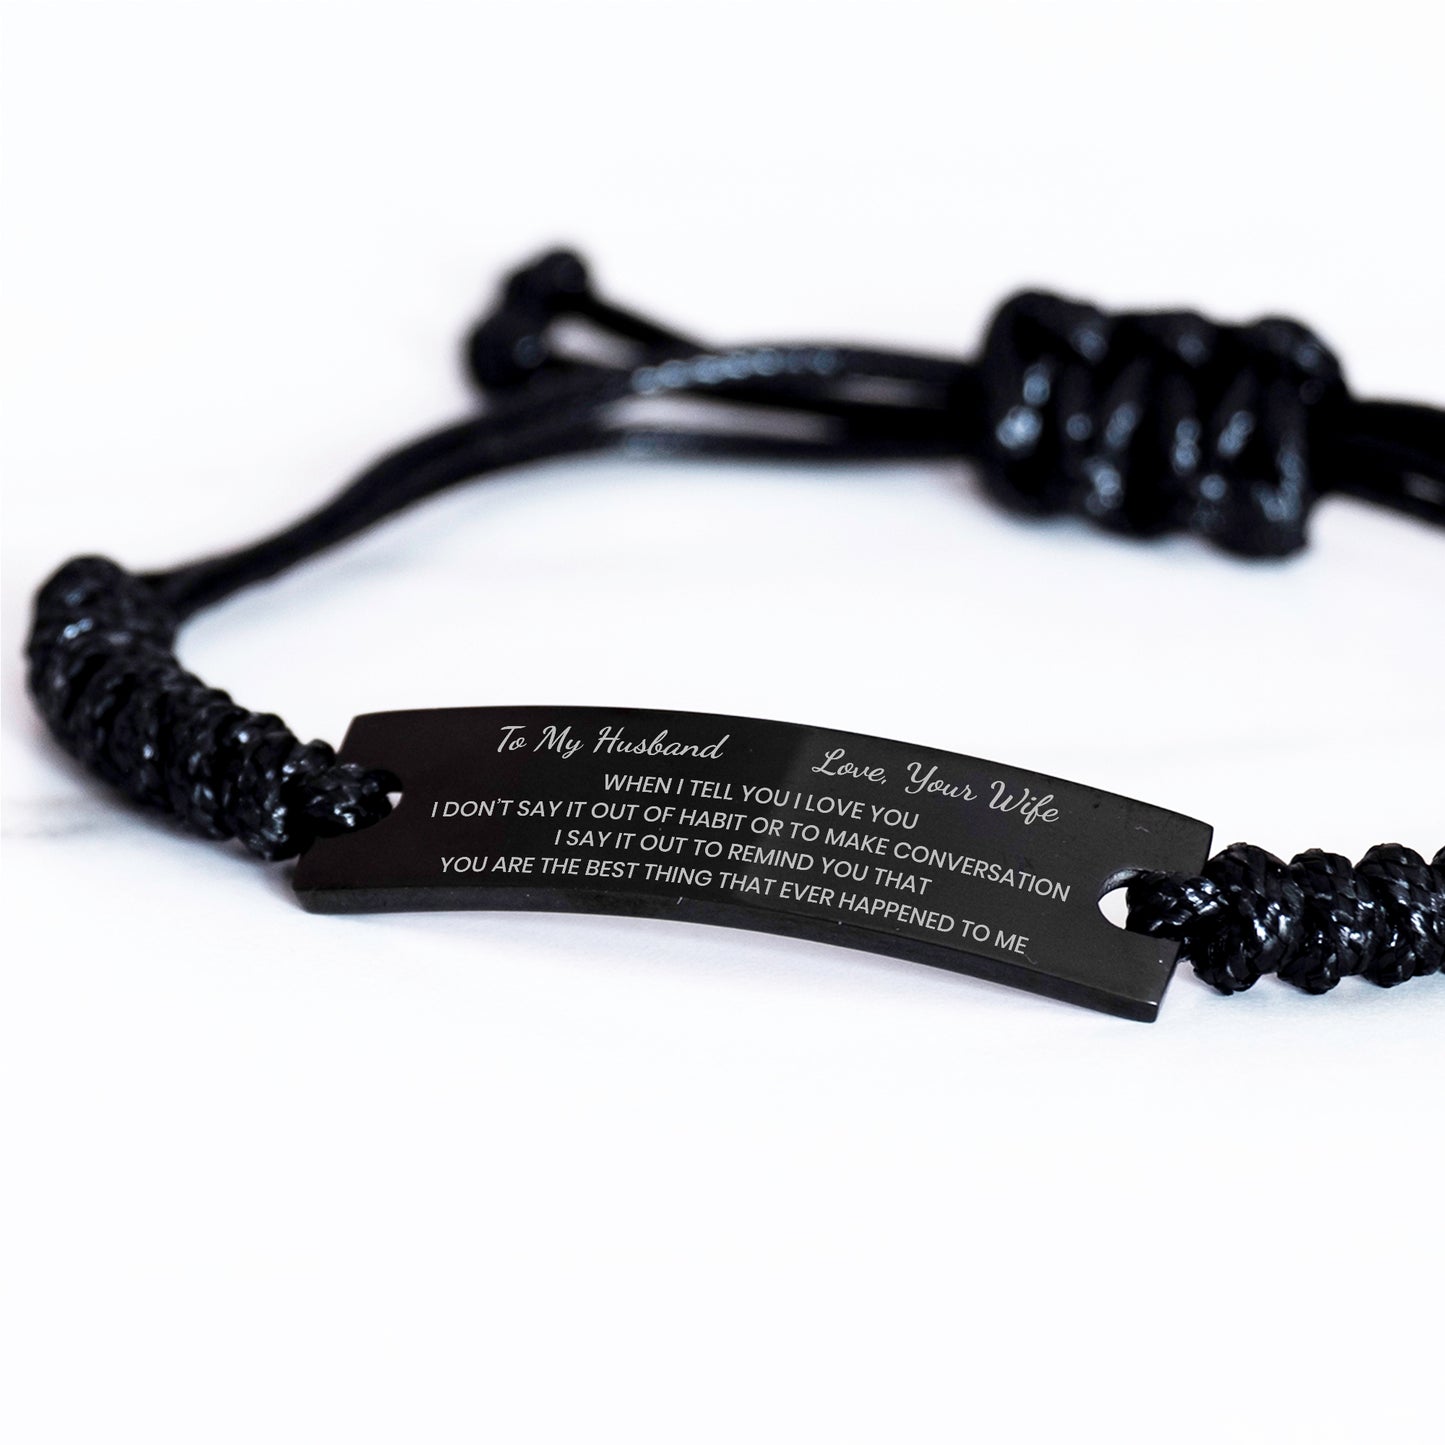 To My Husband Bracelet from Wife, Gift for Husband, Black Braided Rope Bracelet, When I Tell You I Love You, Valentine's Gift.